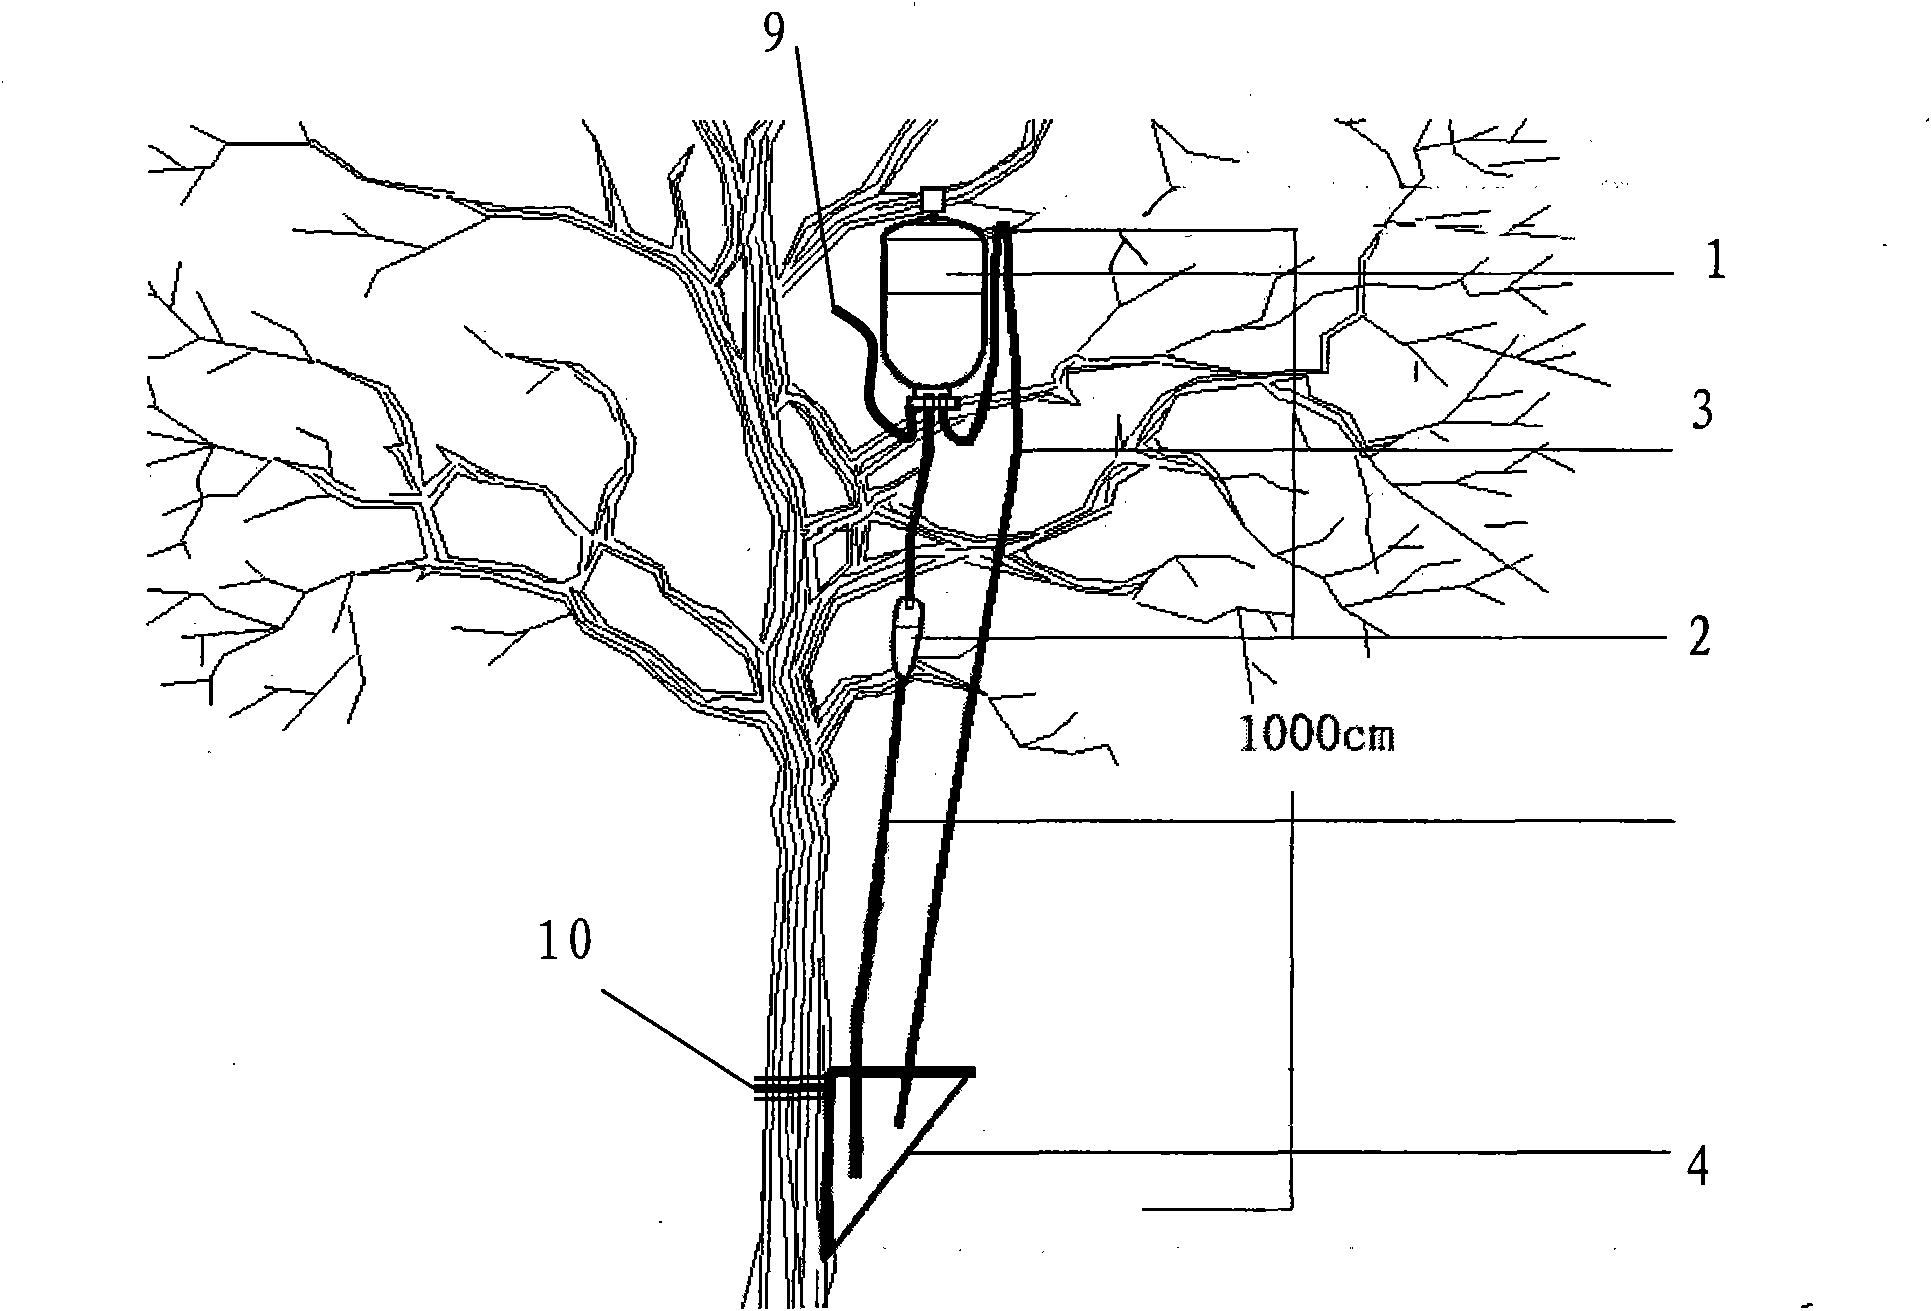 Trunk injector capable of automatically adjusting dosage along with metabolic rate of tree